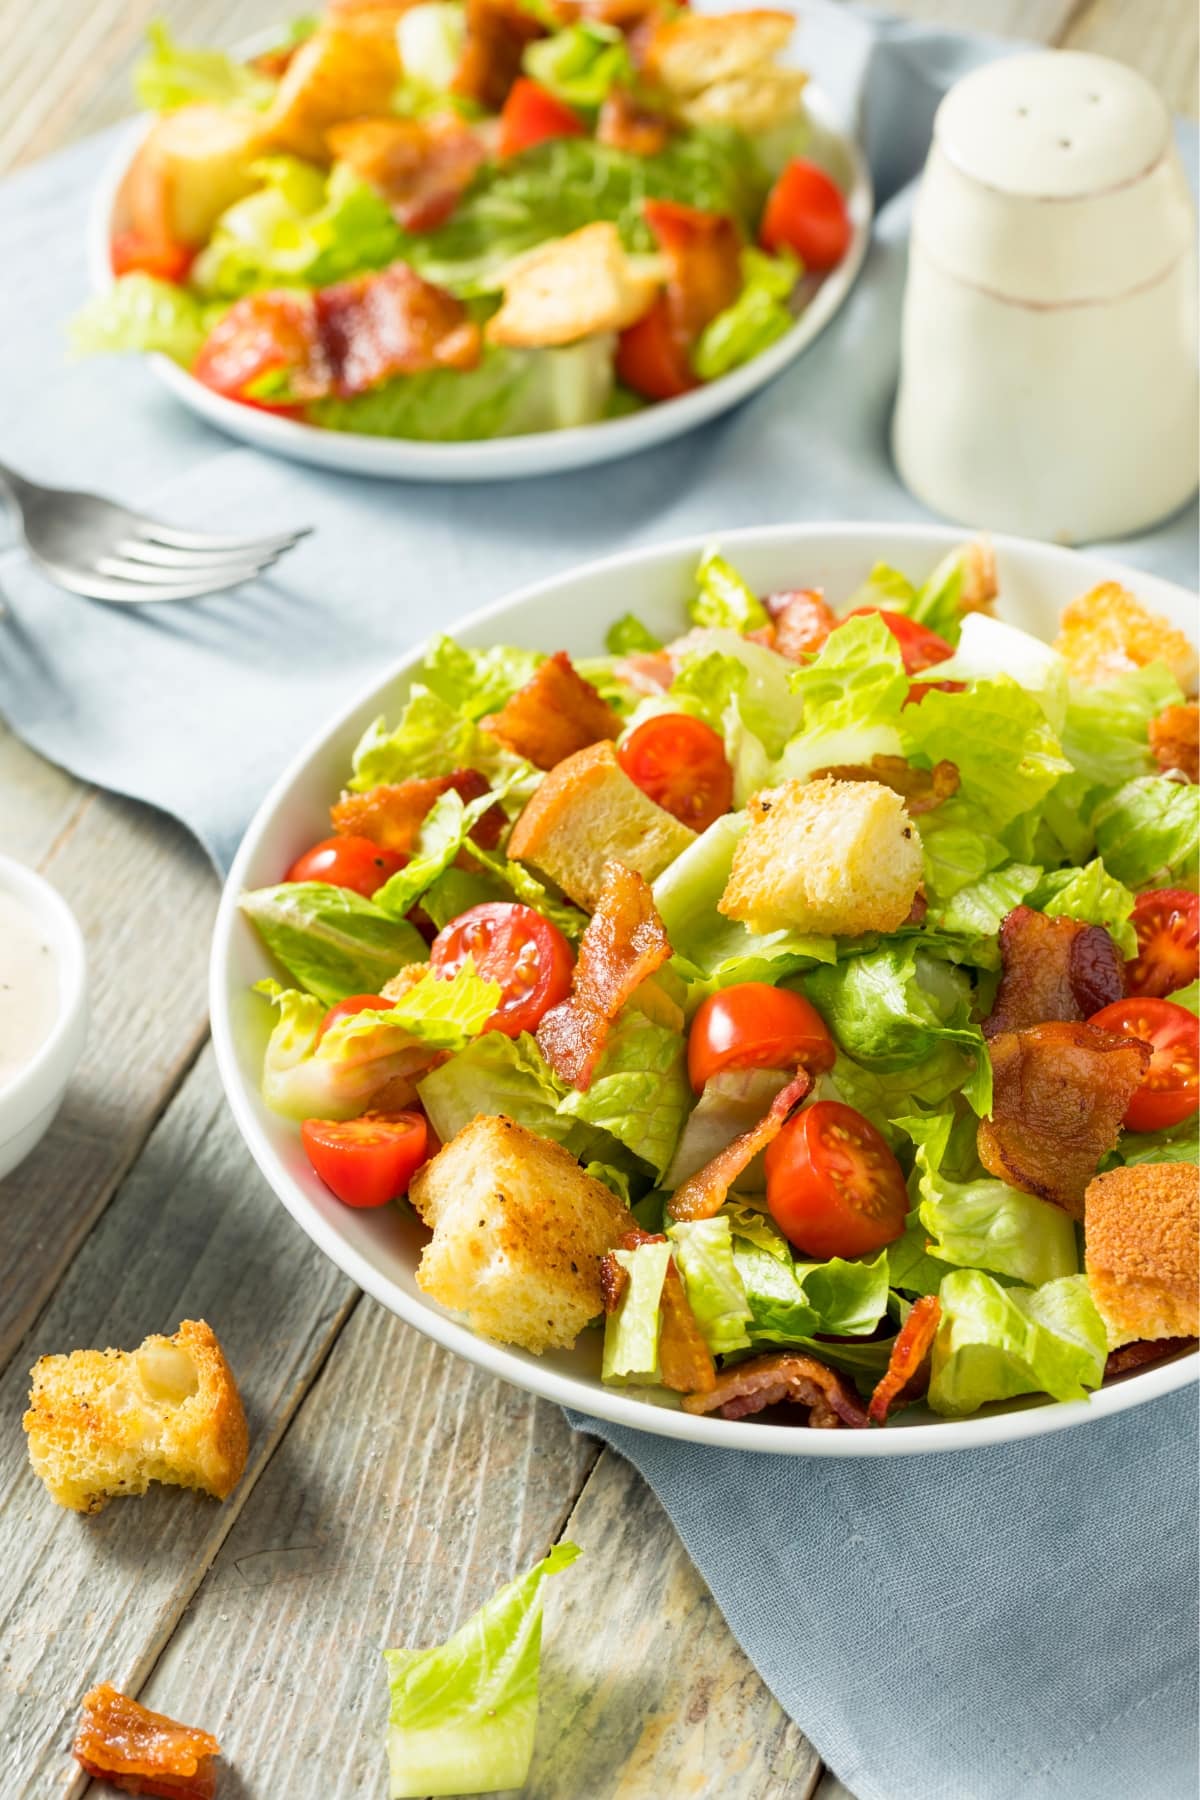 BLT Salad: Bacon, Lettuce and Tomatoes with Croutons